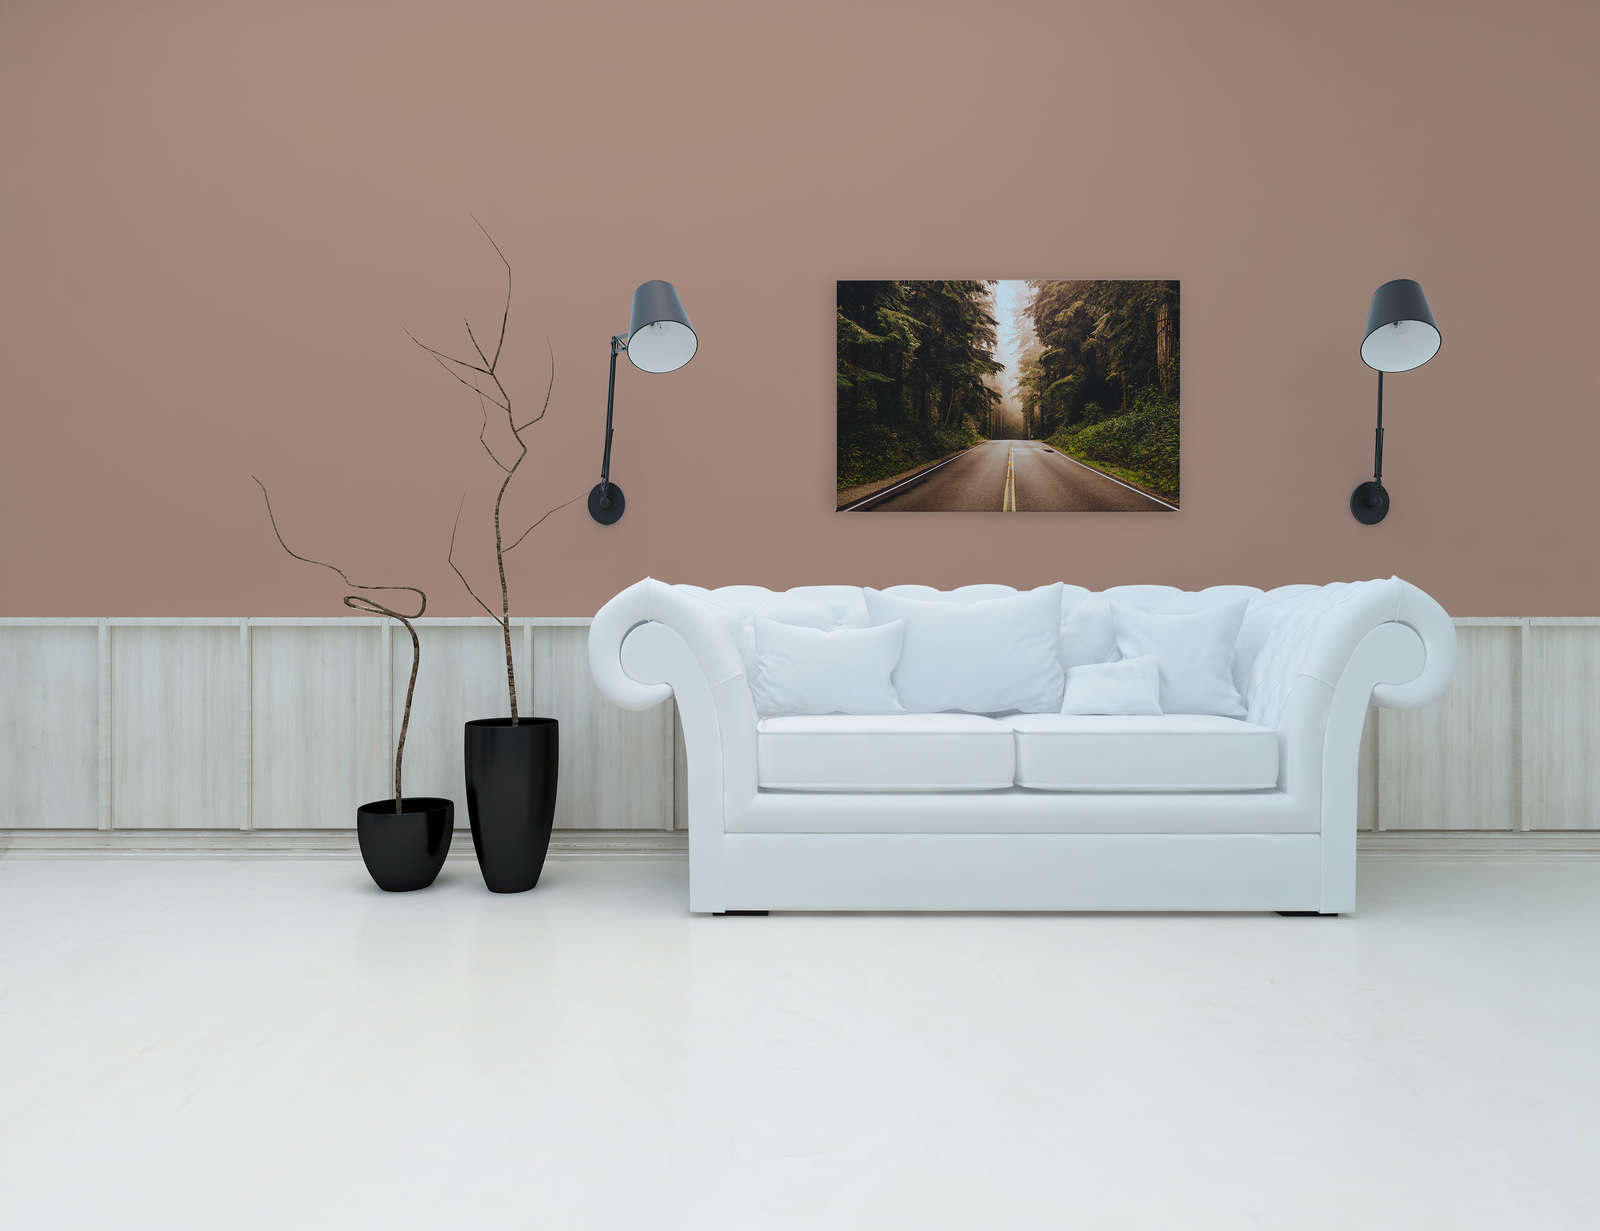             Canvas with American Highway in the Forest - 0.90 m x 0.60 m
        